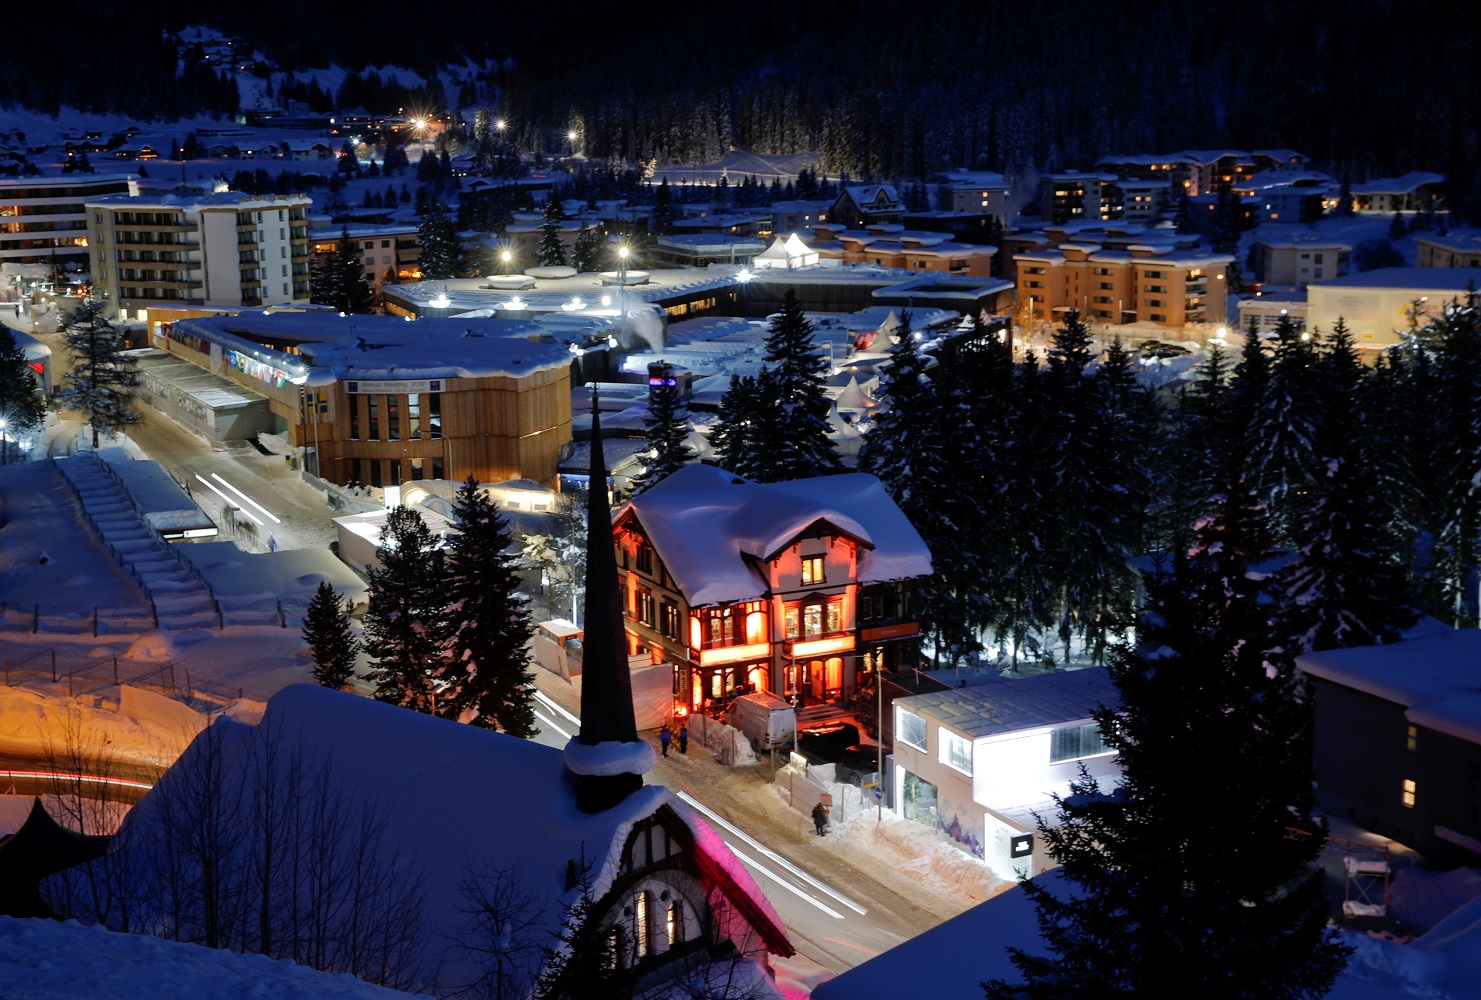 A night view shows a congress centre (L), the venue of the upcoming World Economic Forum (WEF) in the Swiss mountain resort of Davos, Switzerland, January 20, 2019. REUTERS/Arnd Wiegmann